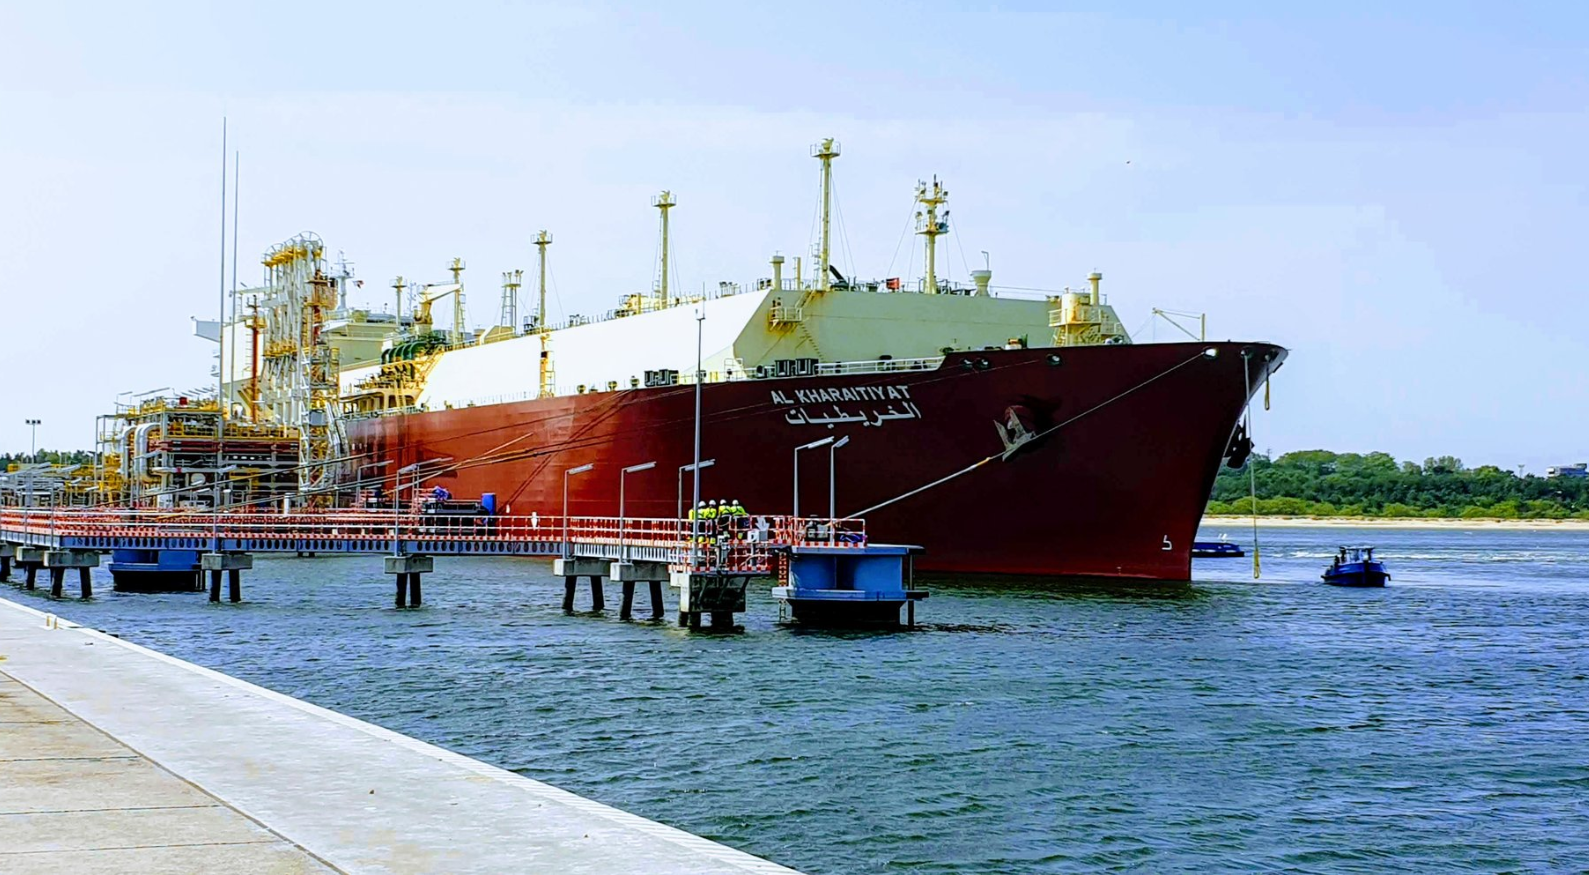 The largest distribution pipelines under the LNG Terminal Act